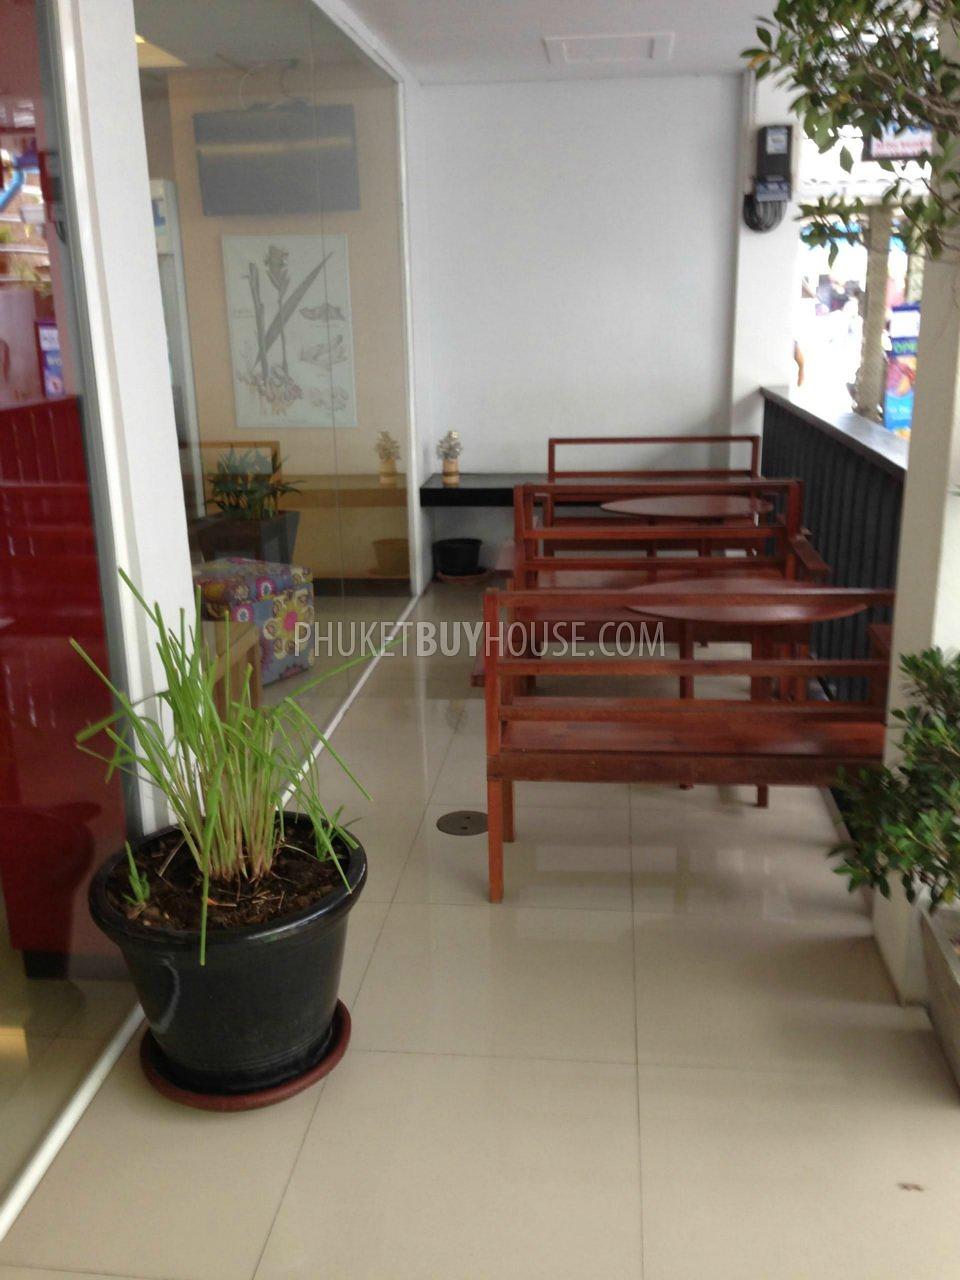 PAT5348: 4-floor Hotel For Sale in the Heart of Patong. Photo #1